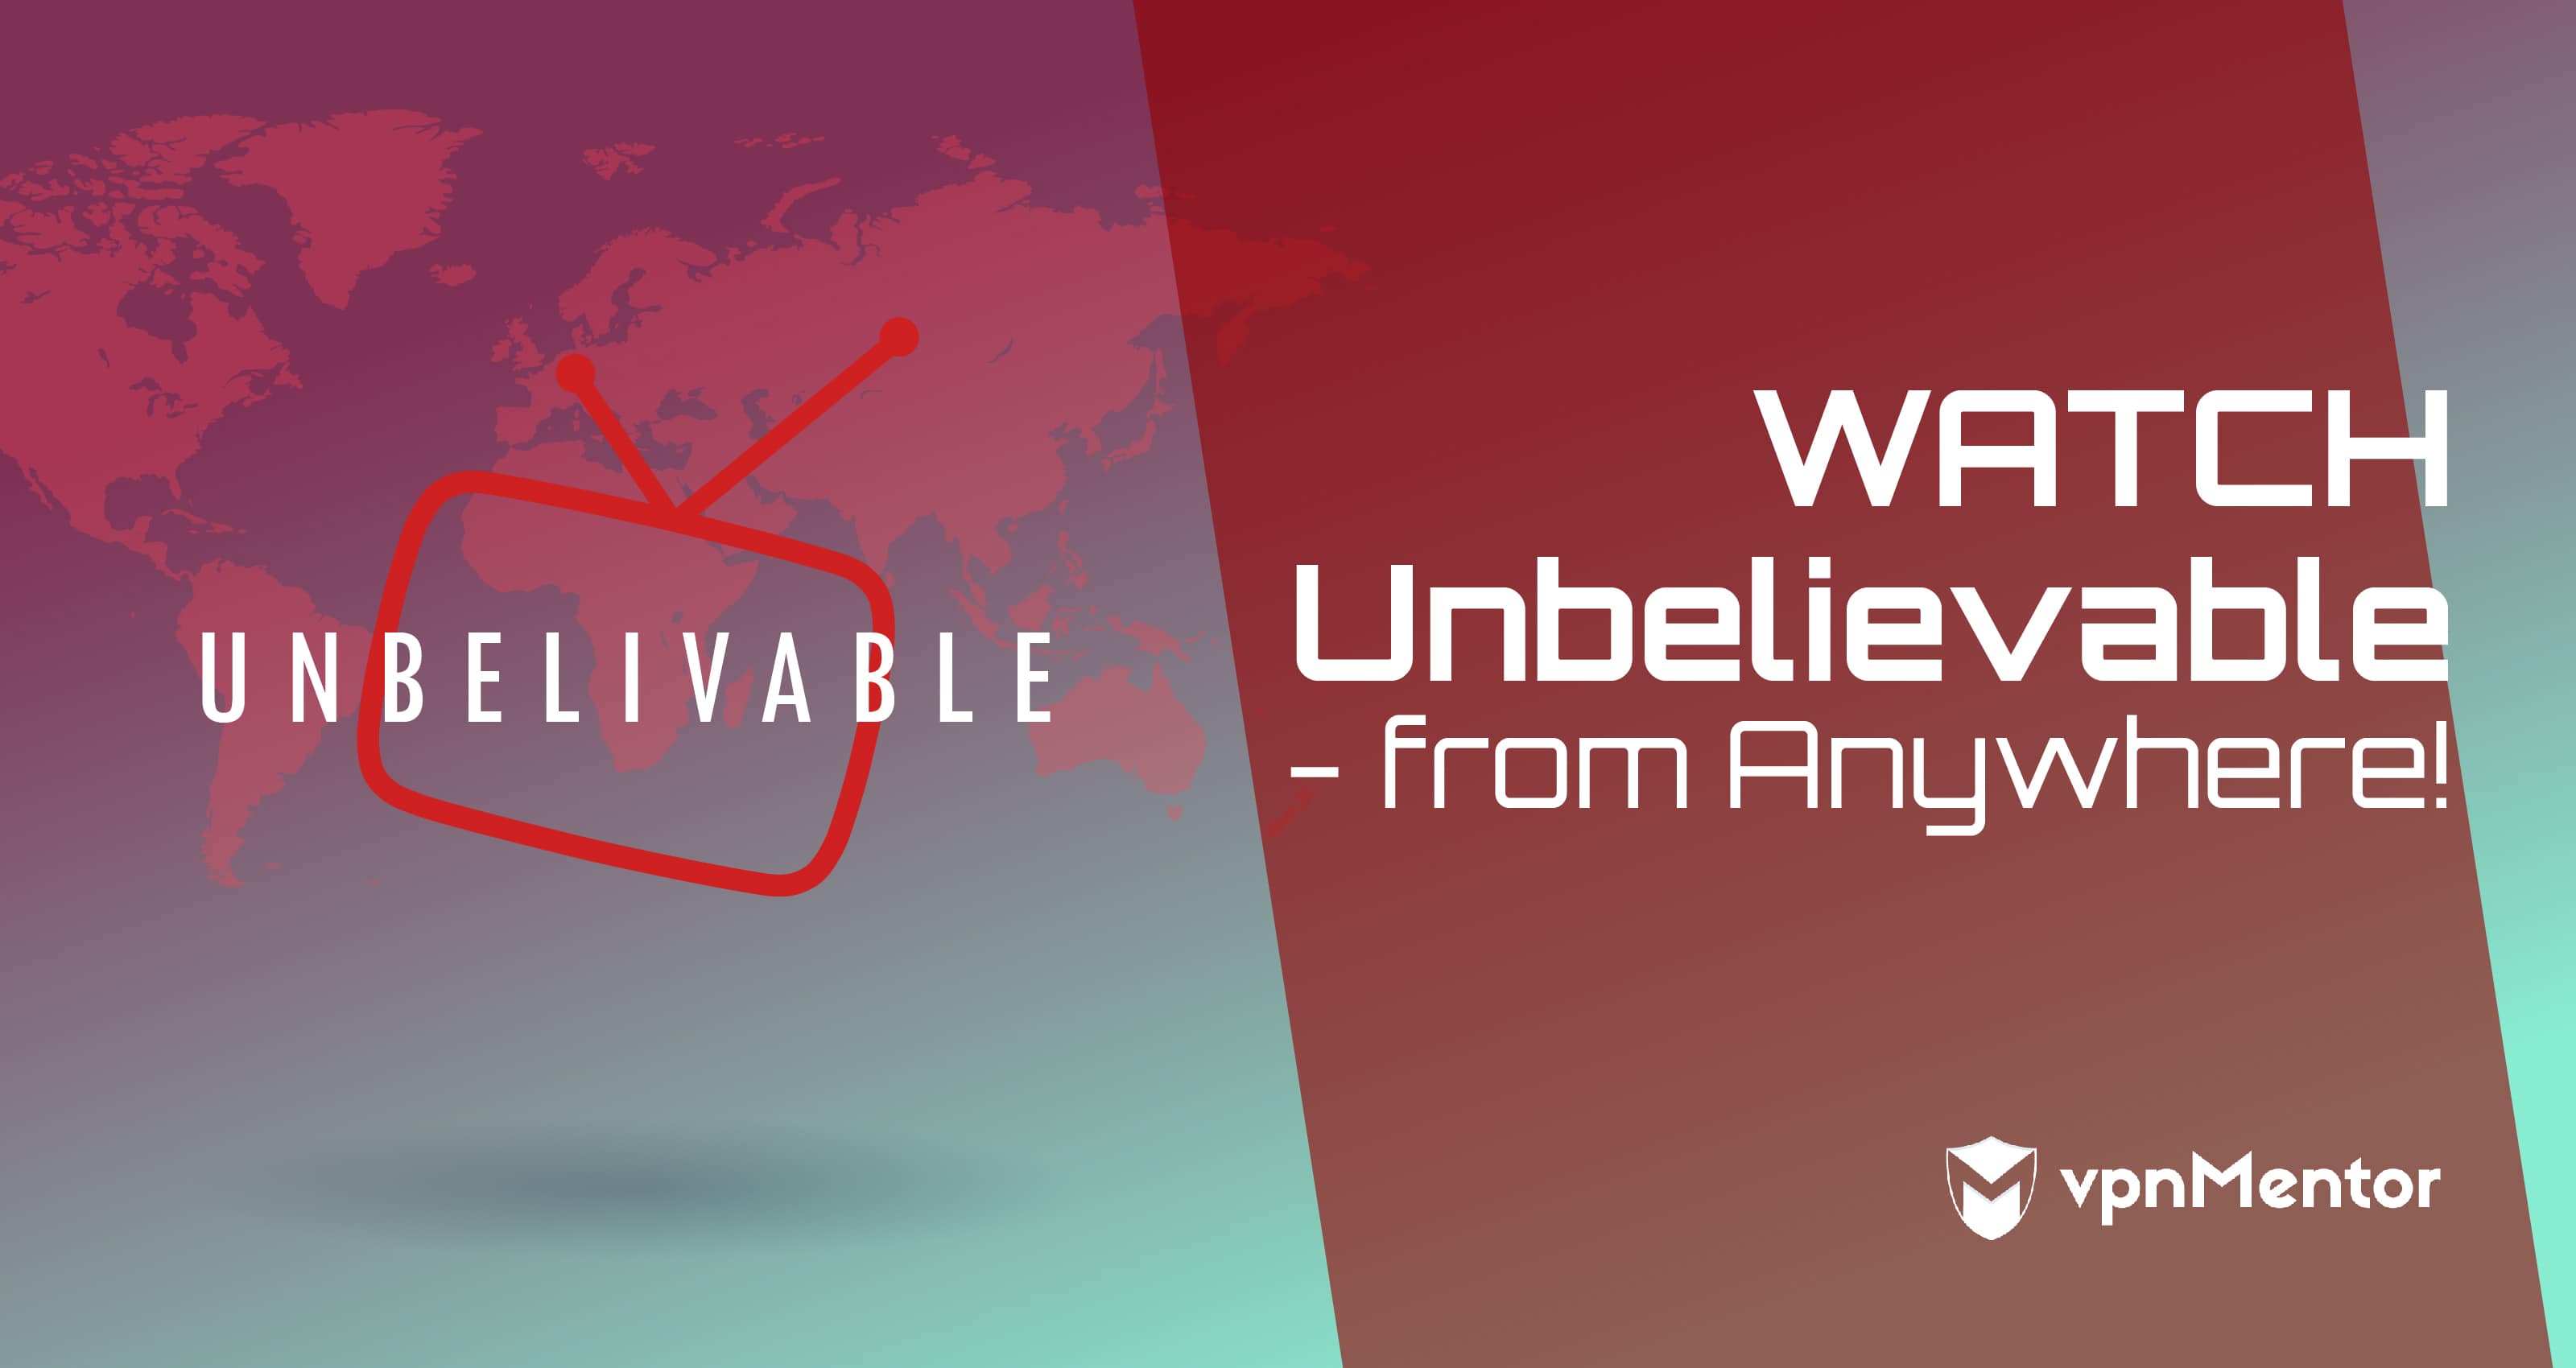 Watch Unbelievable From Anywhere in 2022!